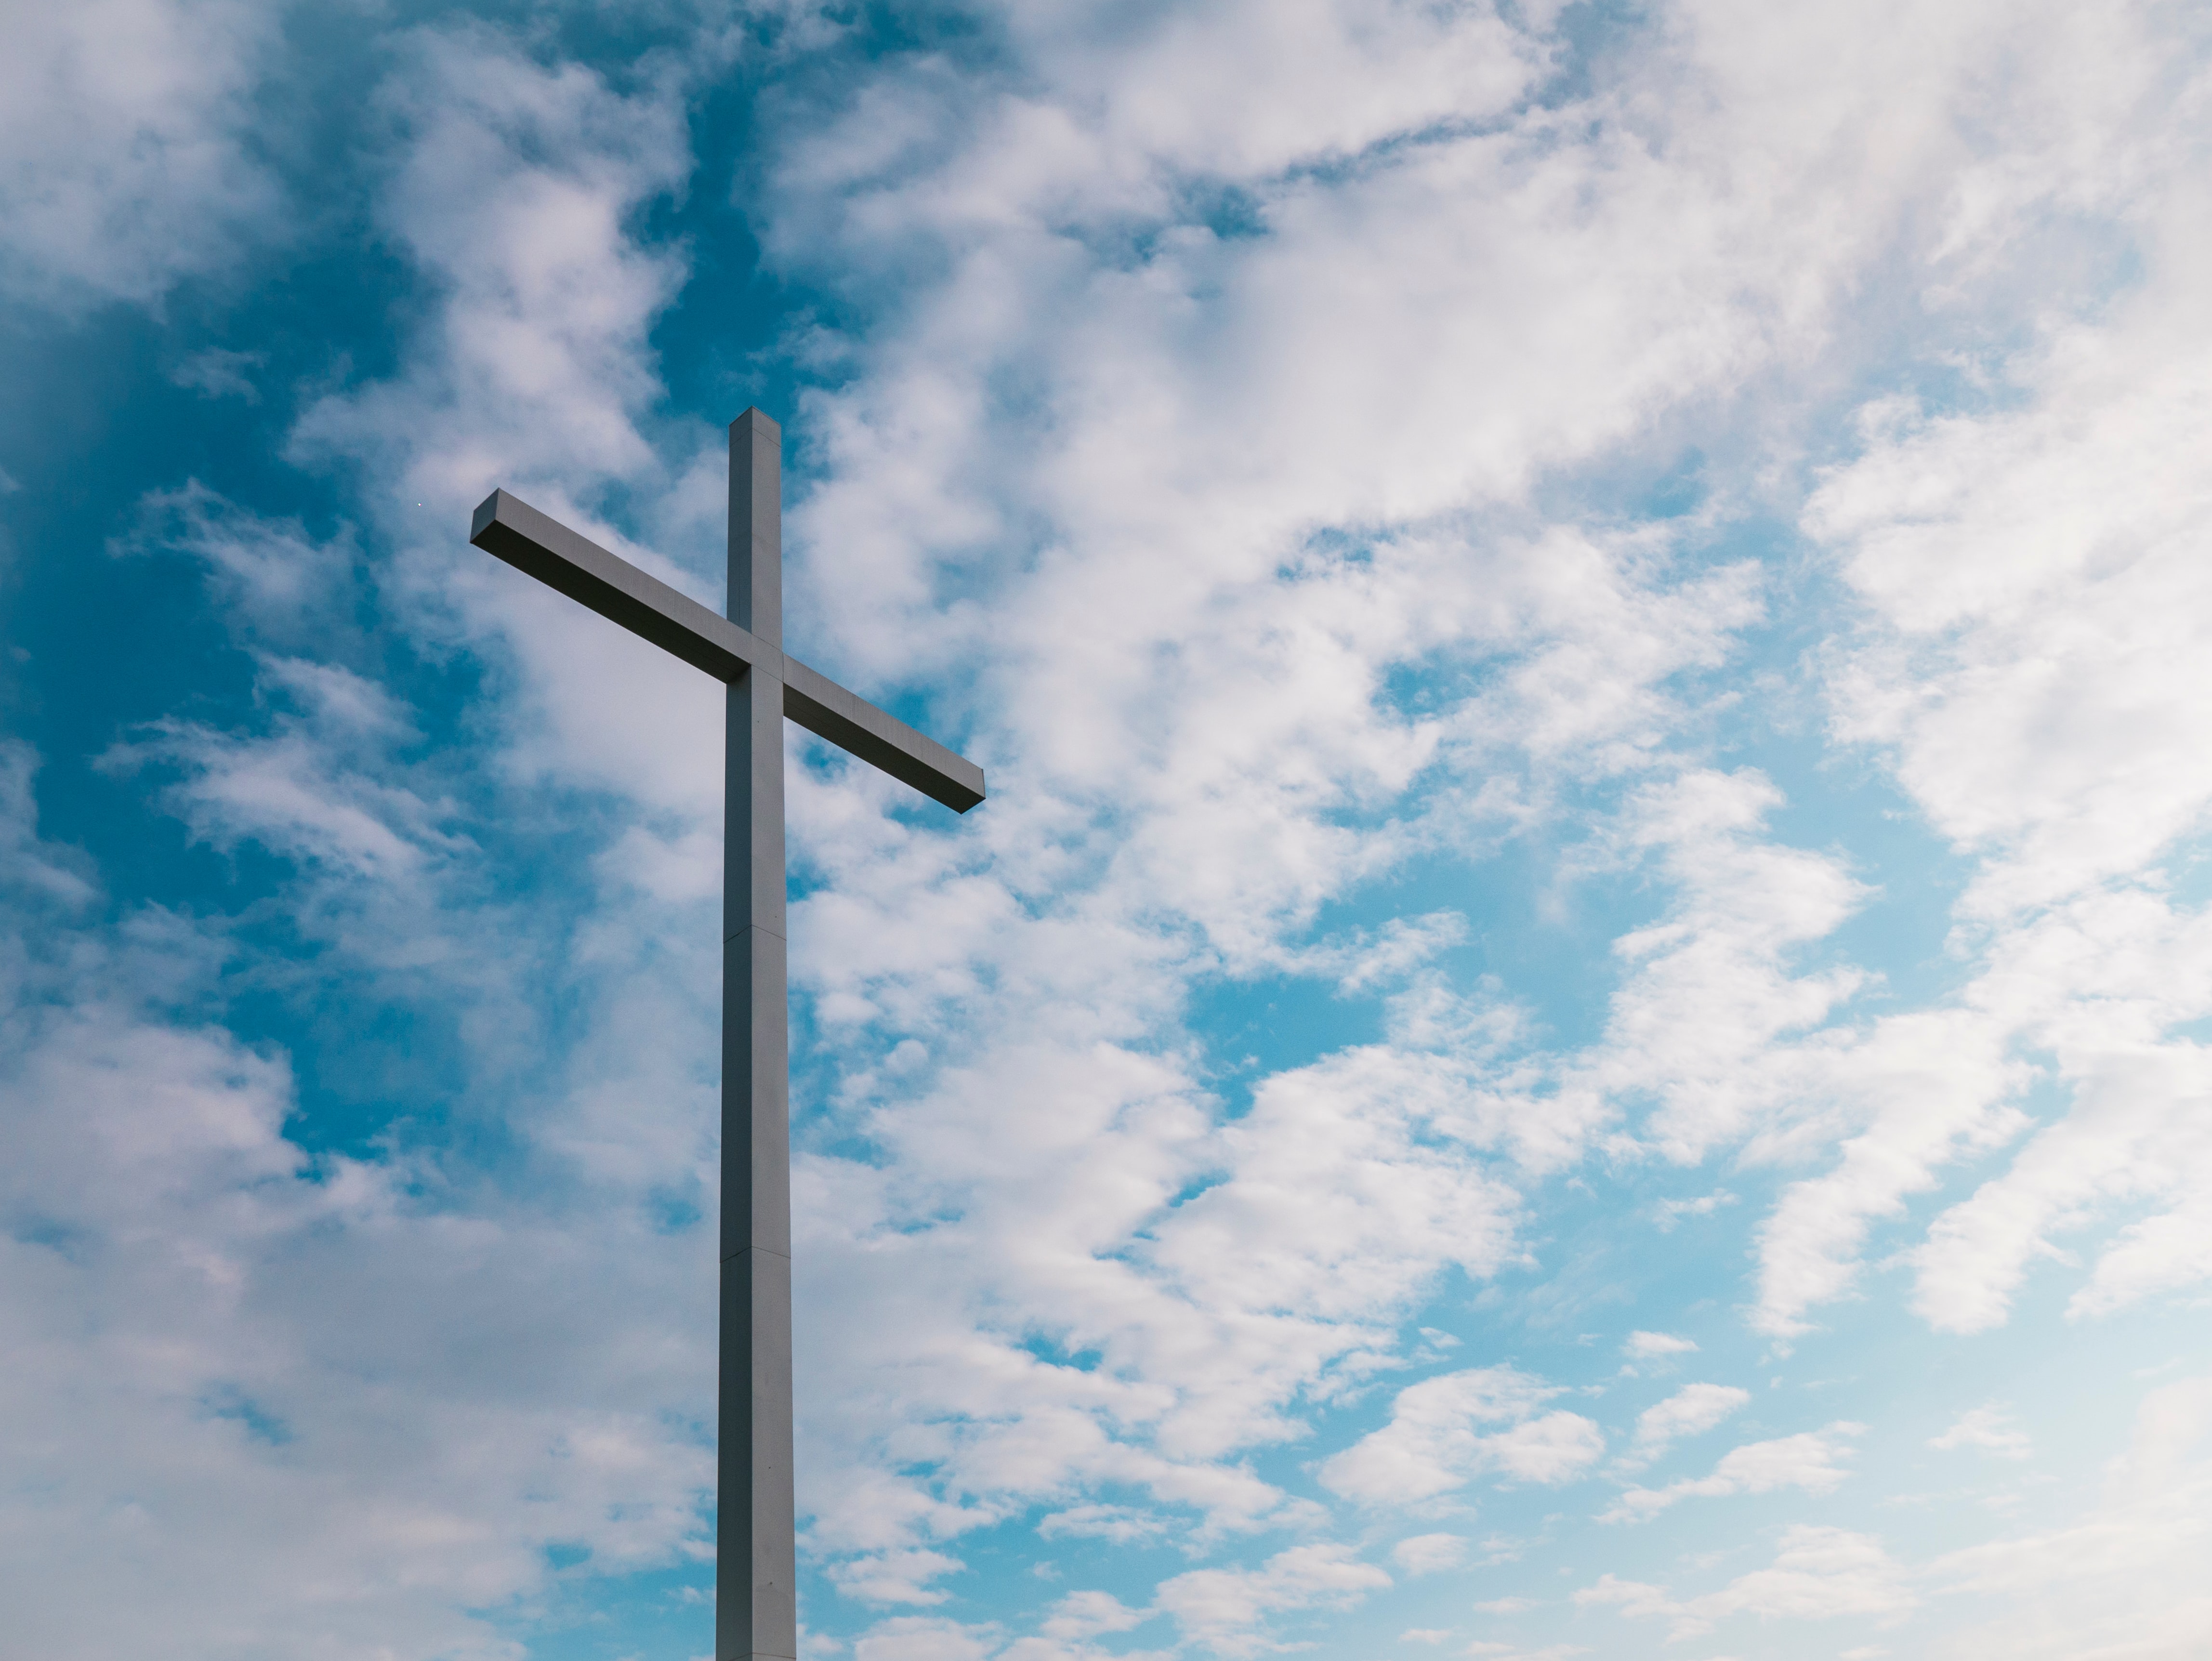 How Does Christianity Differ?